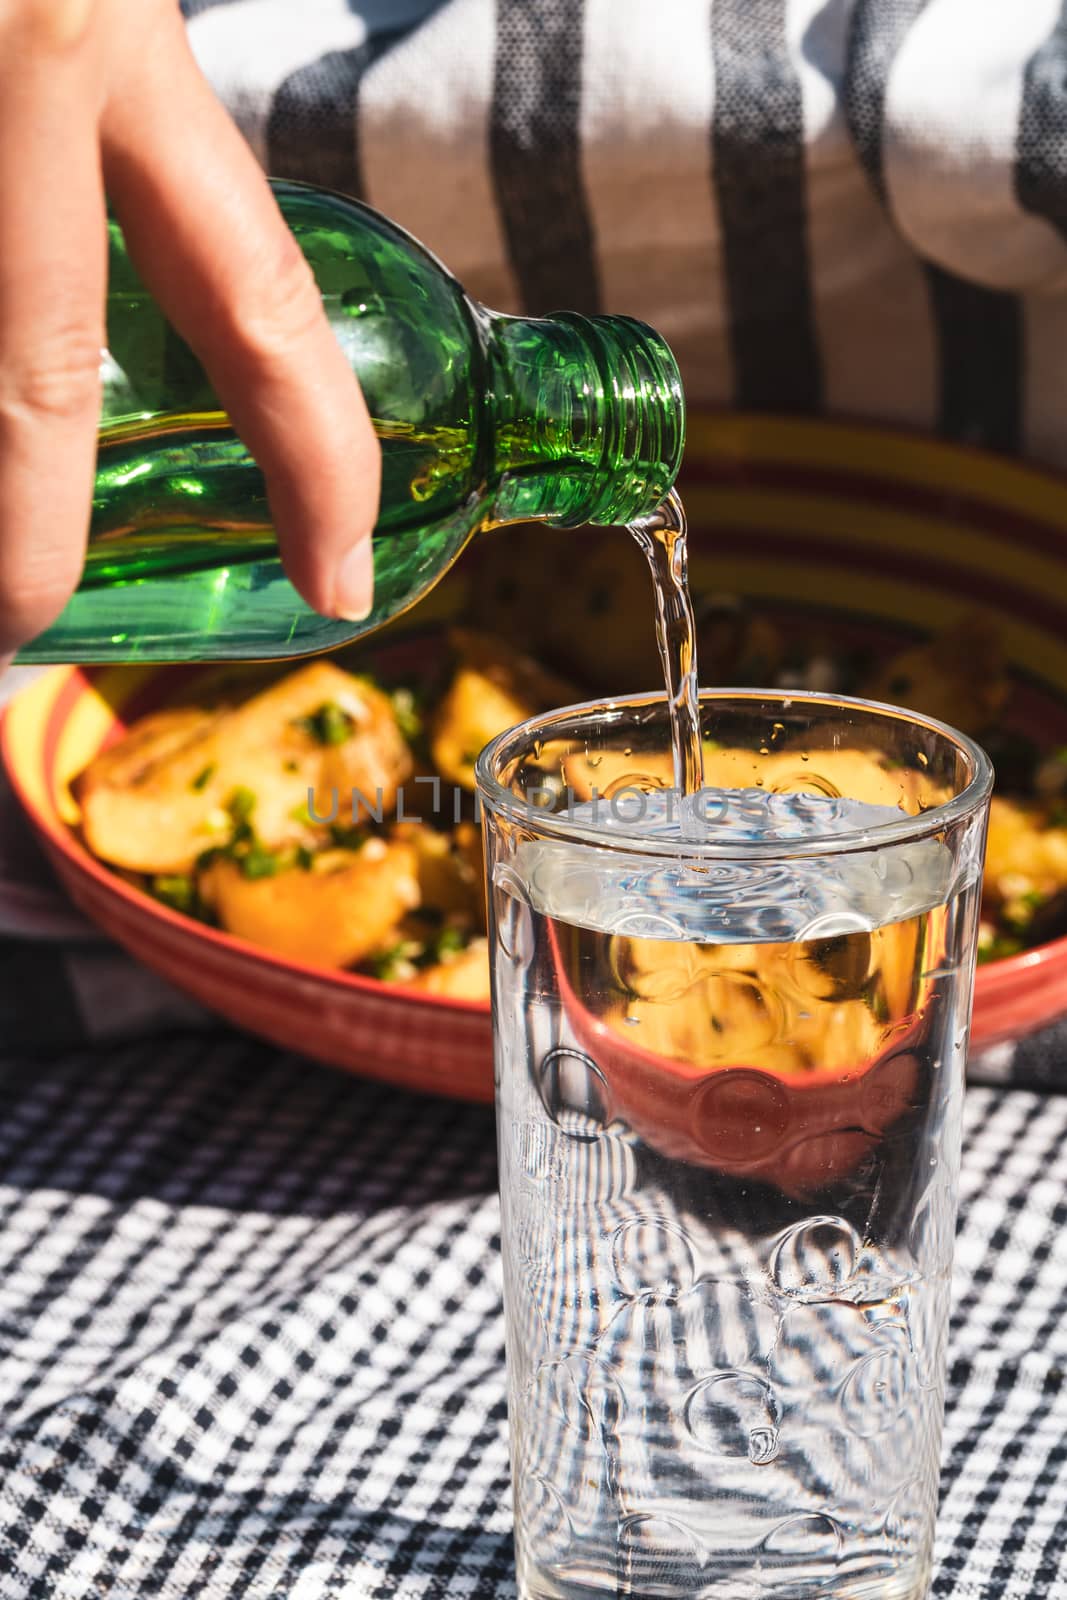 Pouring water from green bottle into a glass. Fried potatoes dish in the background